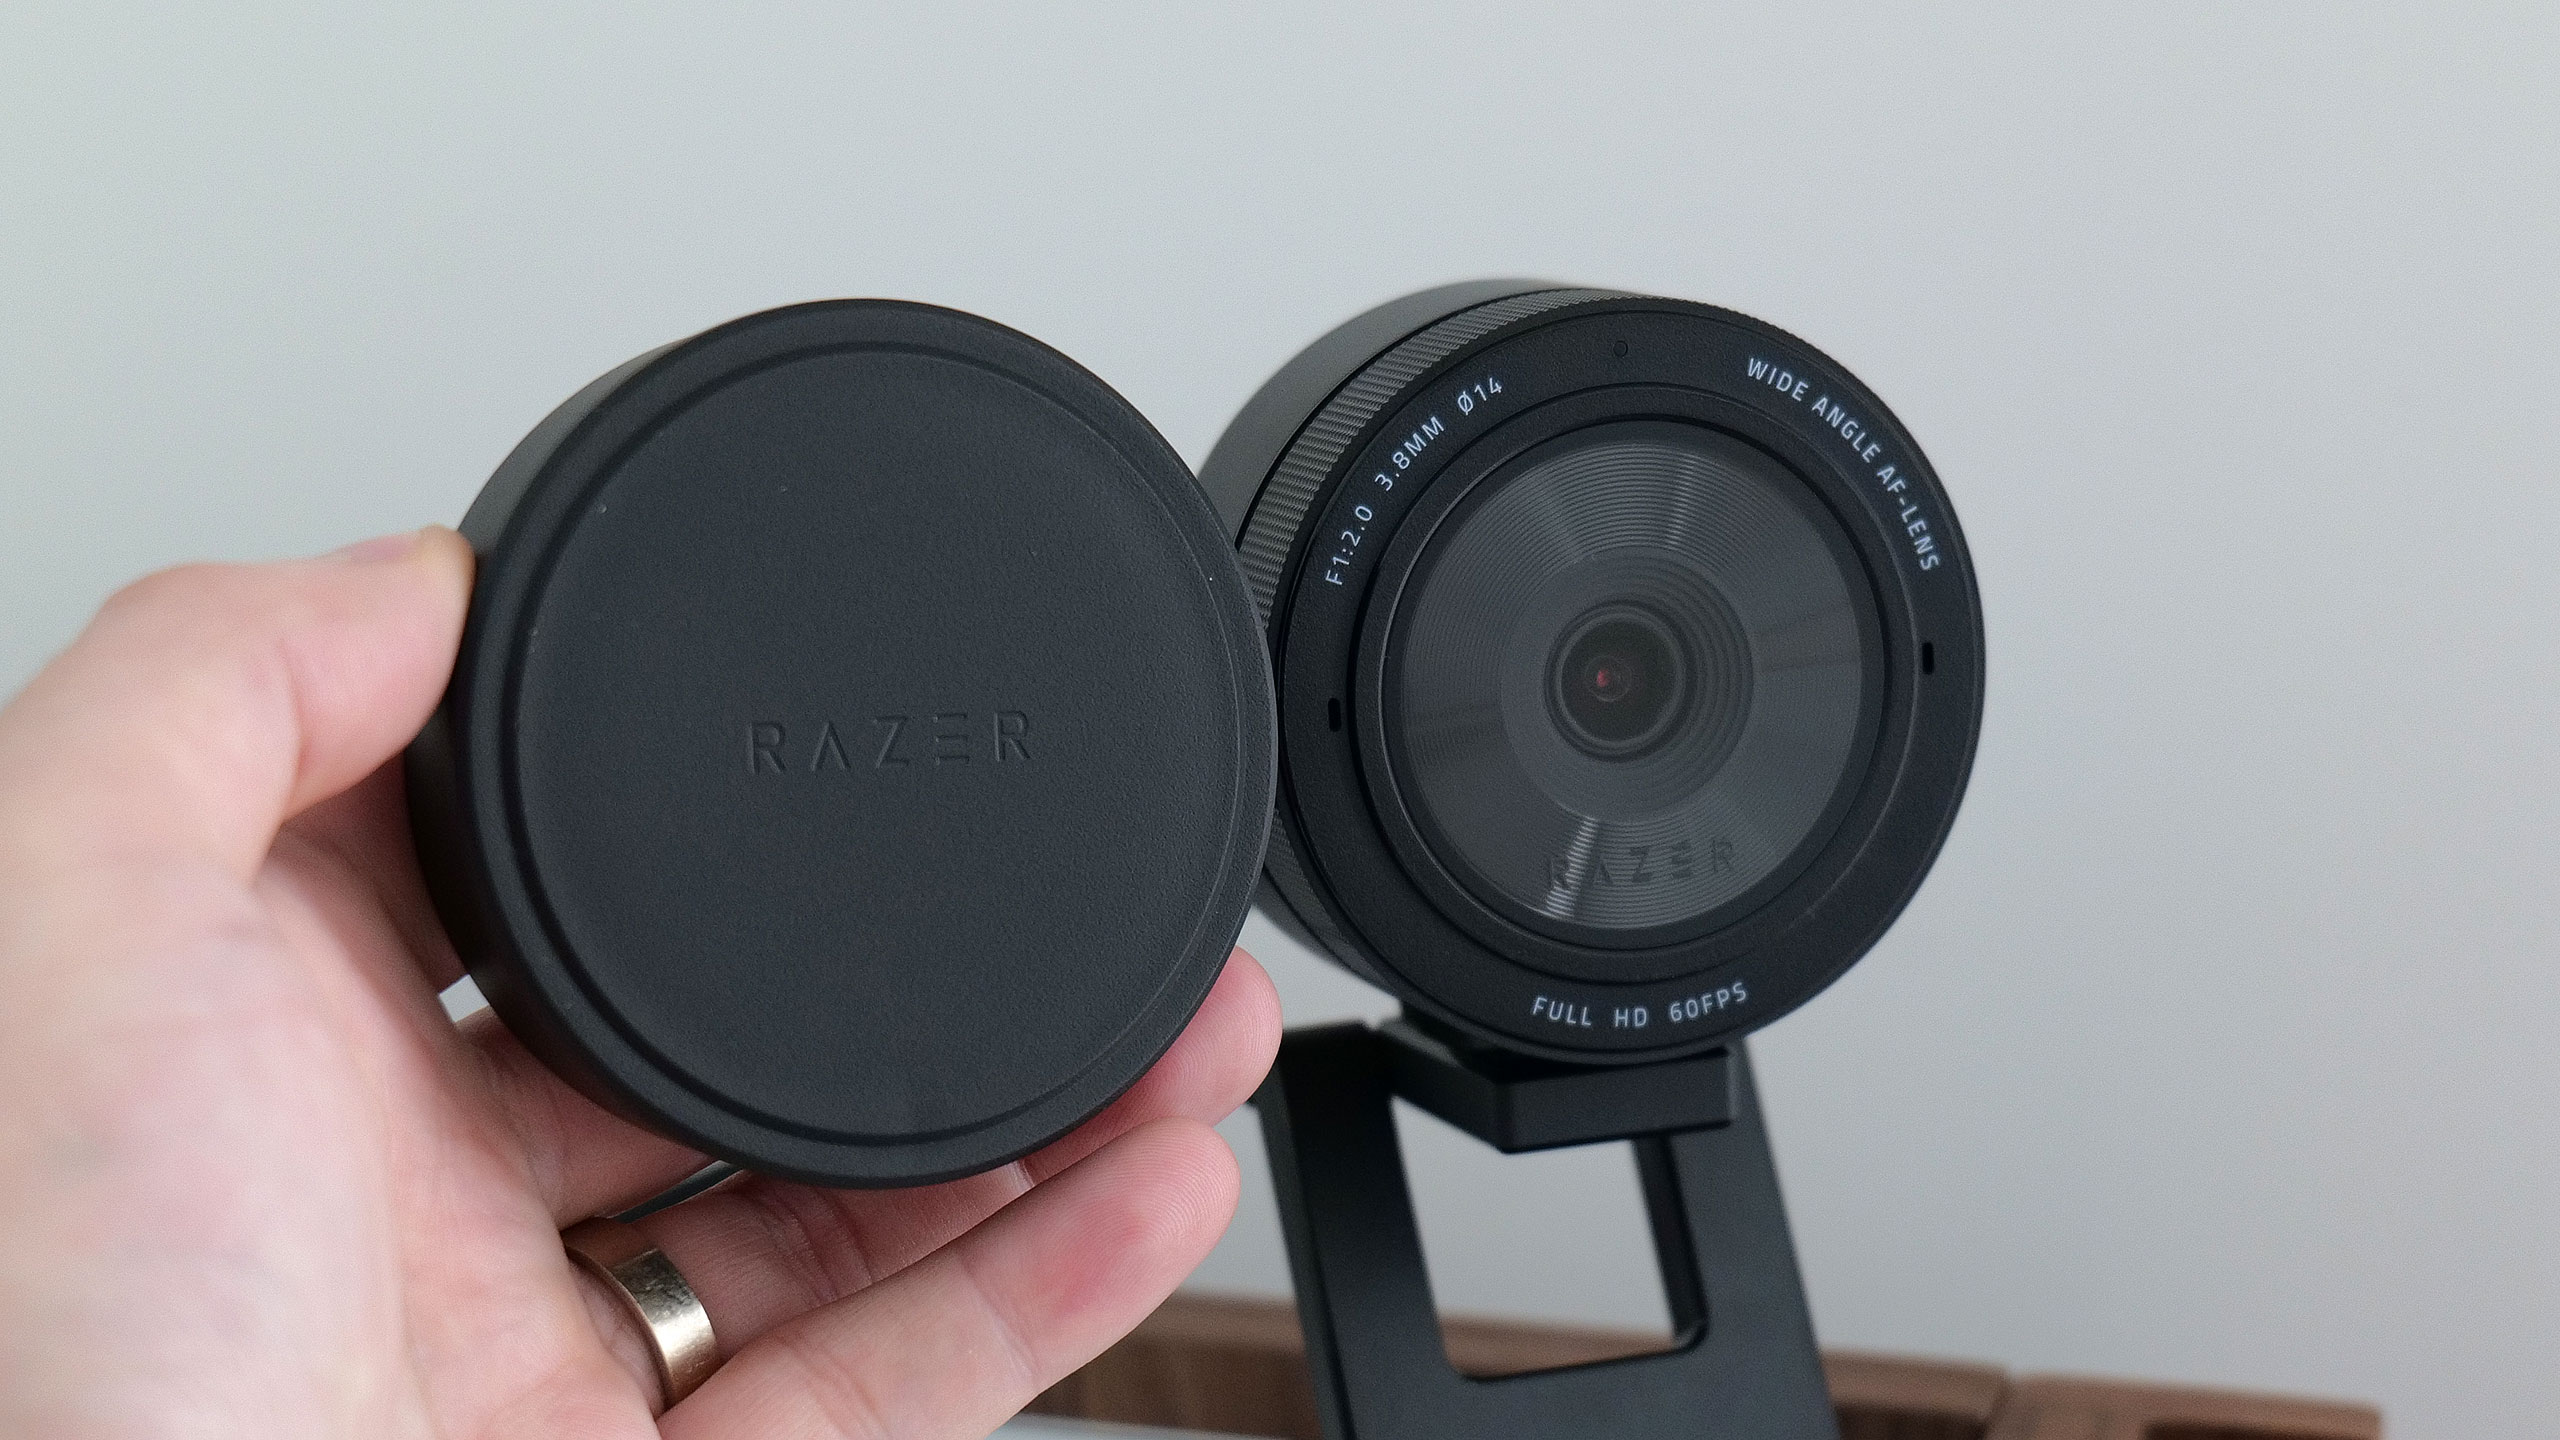 Since people probably won't move their webcams around a lot, I think it would have been nice if the Kiyo Pro's lens cover had a way of attaching to the webcam, instead of being two separate pieces.  (Photo: Sam Rutherford)